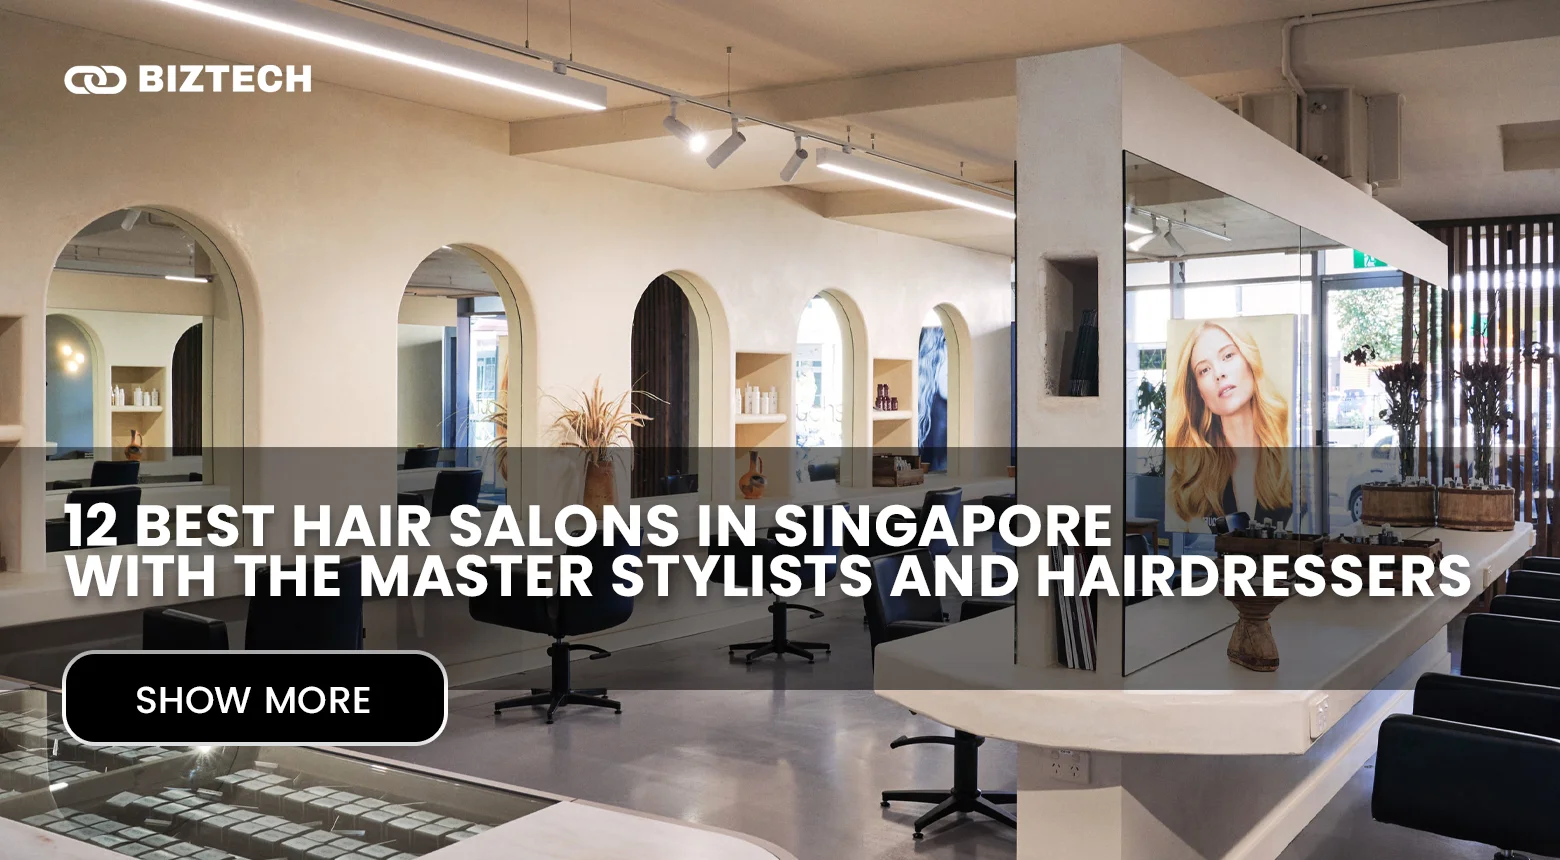 12 Best Hair Salons in Singapore with the Master Stylists and Hairdressers